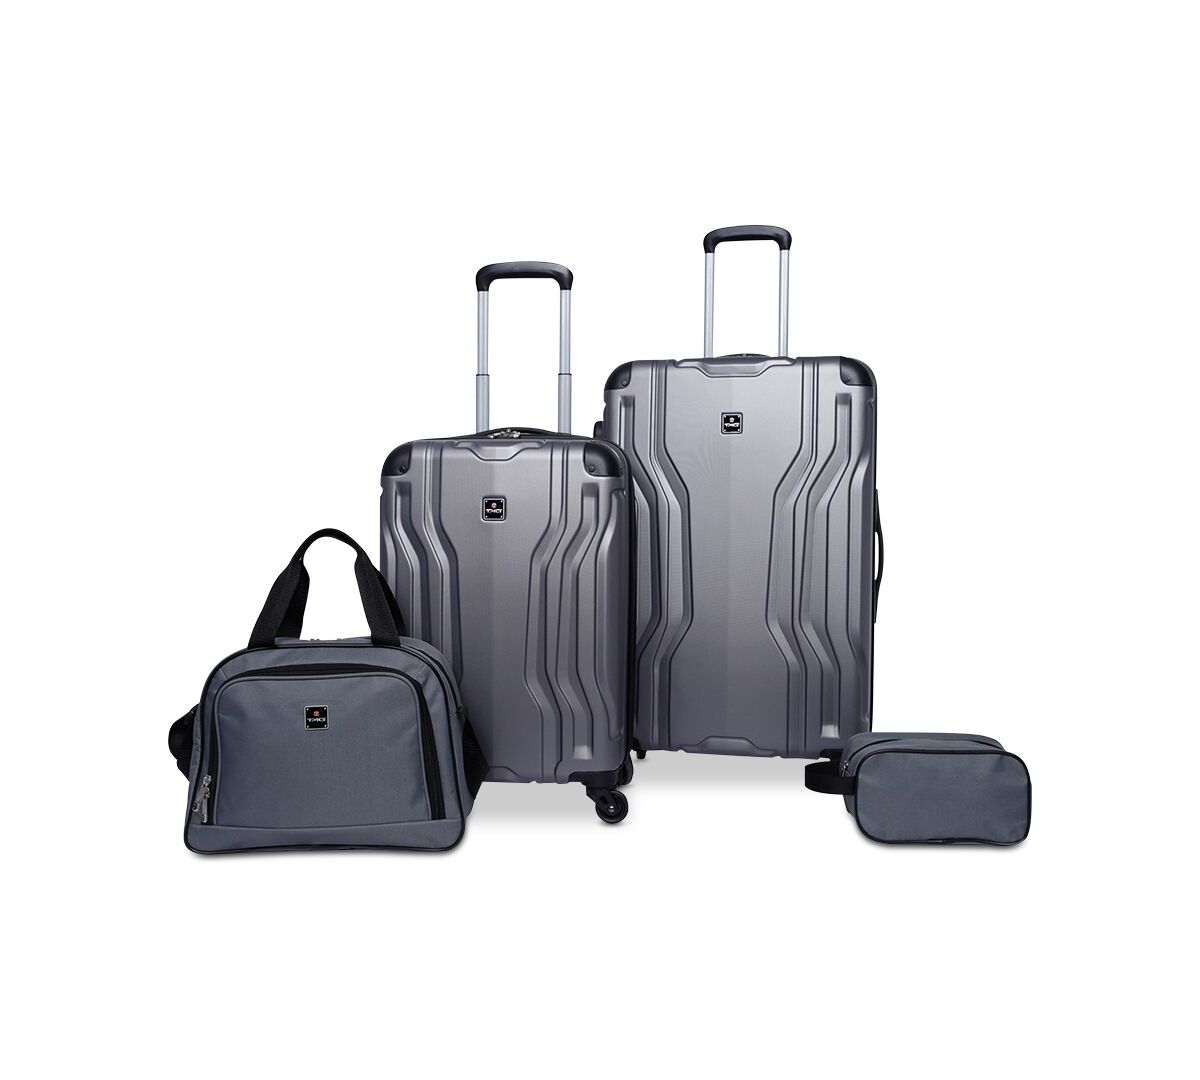 Tag Legacy 4-Pc. Luggage Set, Created for Macy's - Charcoal